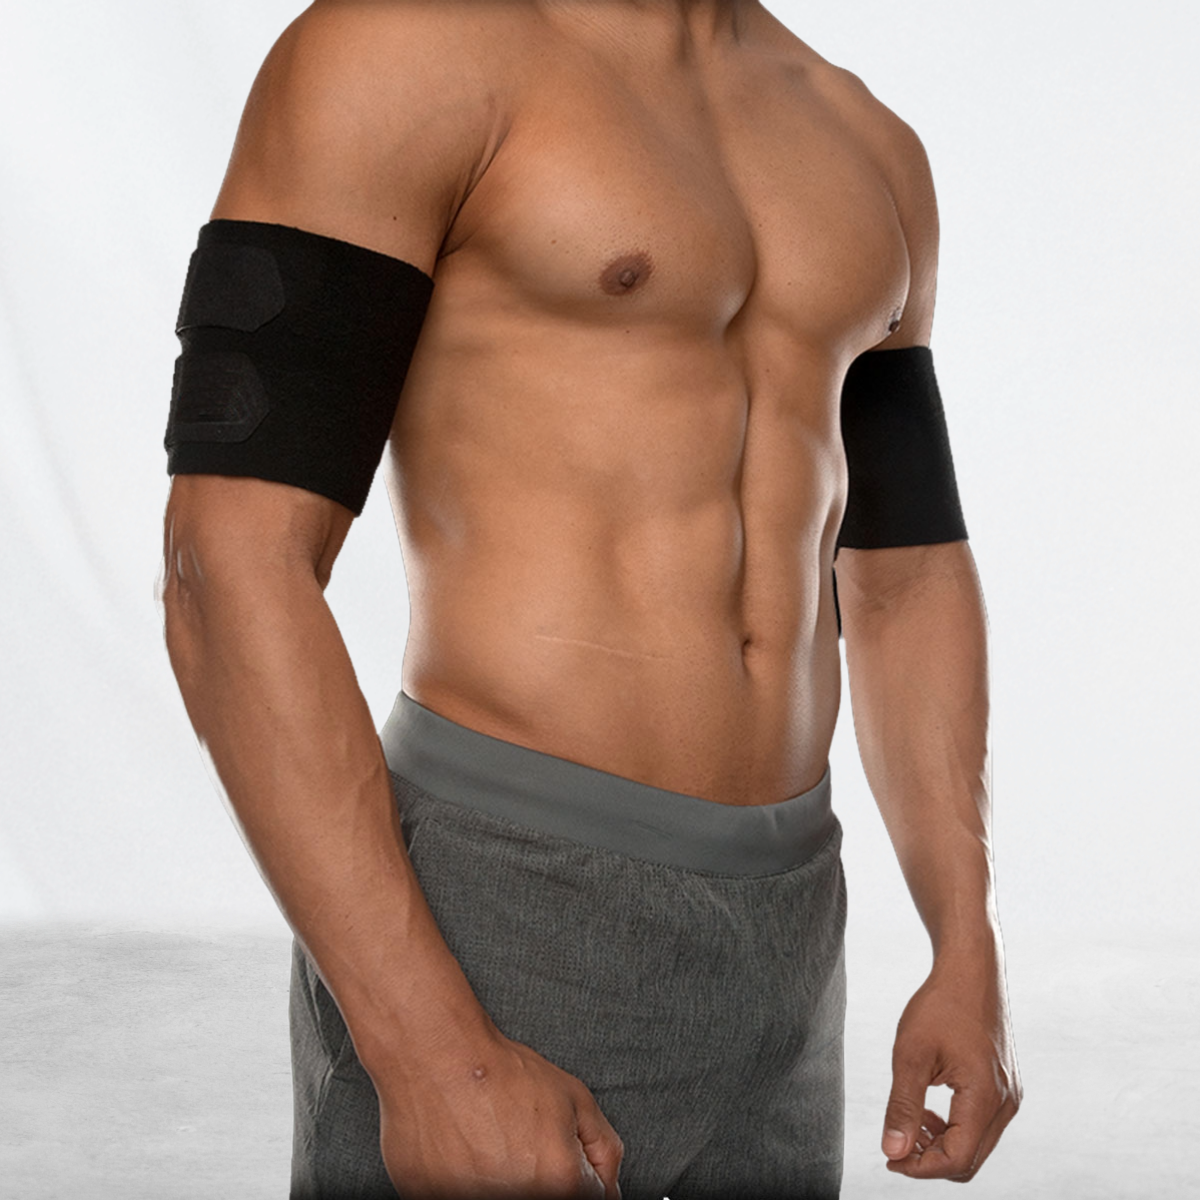 Get Your Arms Fit with TC1 Arm Trimming Wraps - Neoprene Arm Bands, Compression Sleeves & Upper Arm Shapers for Fast Toning. Perfect Gym Accessories for Men & Women!